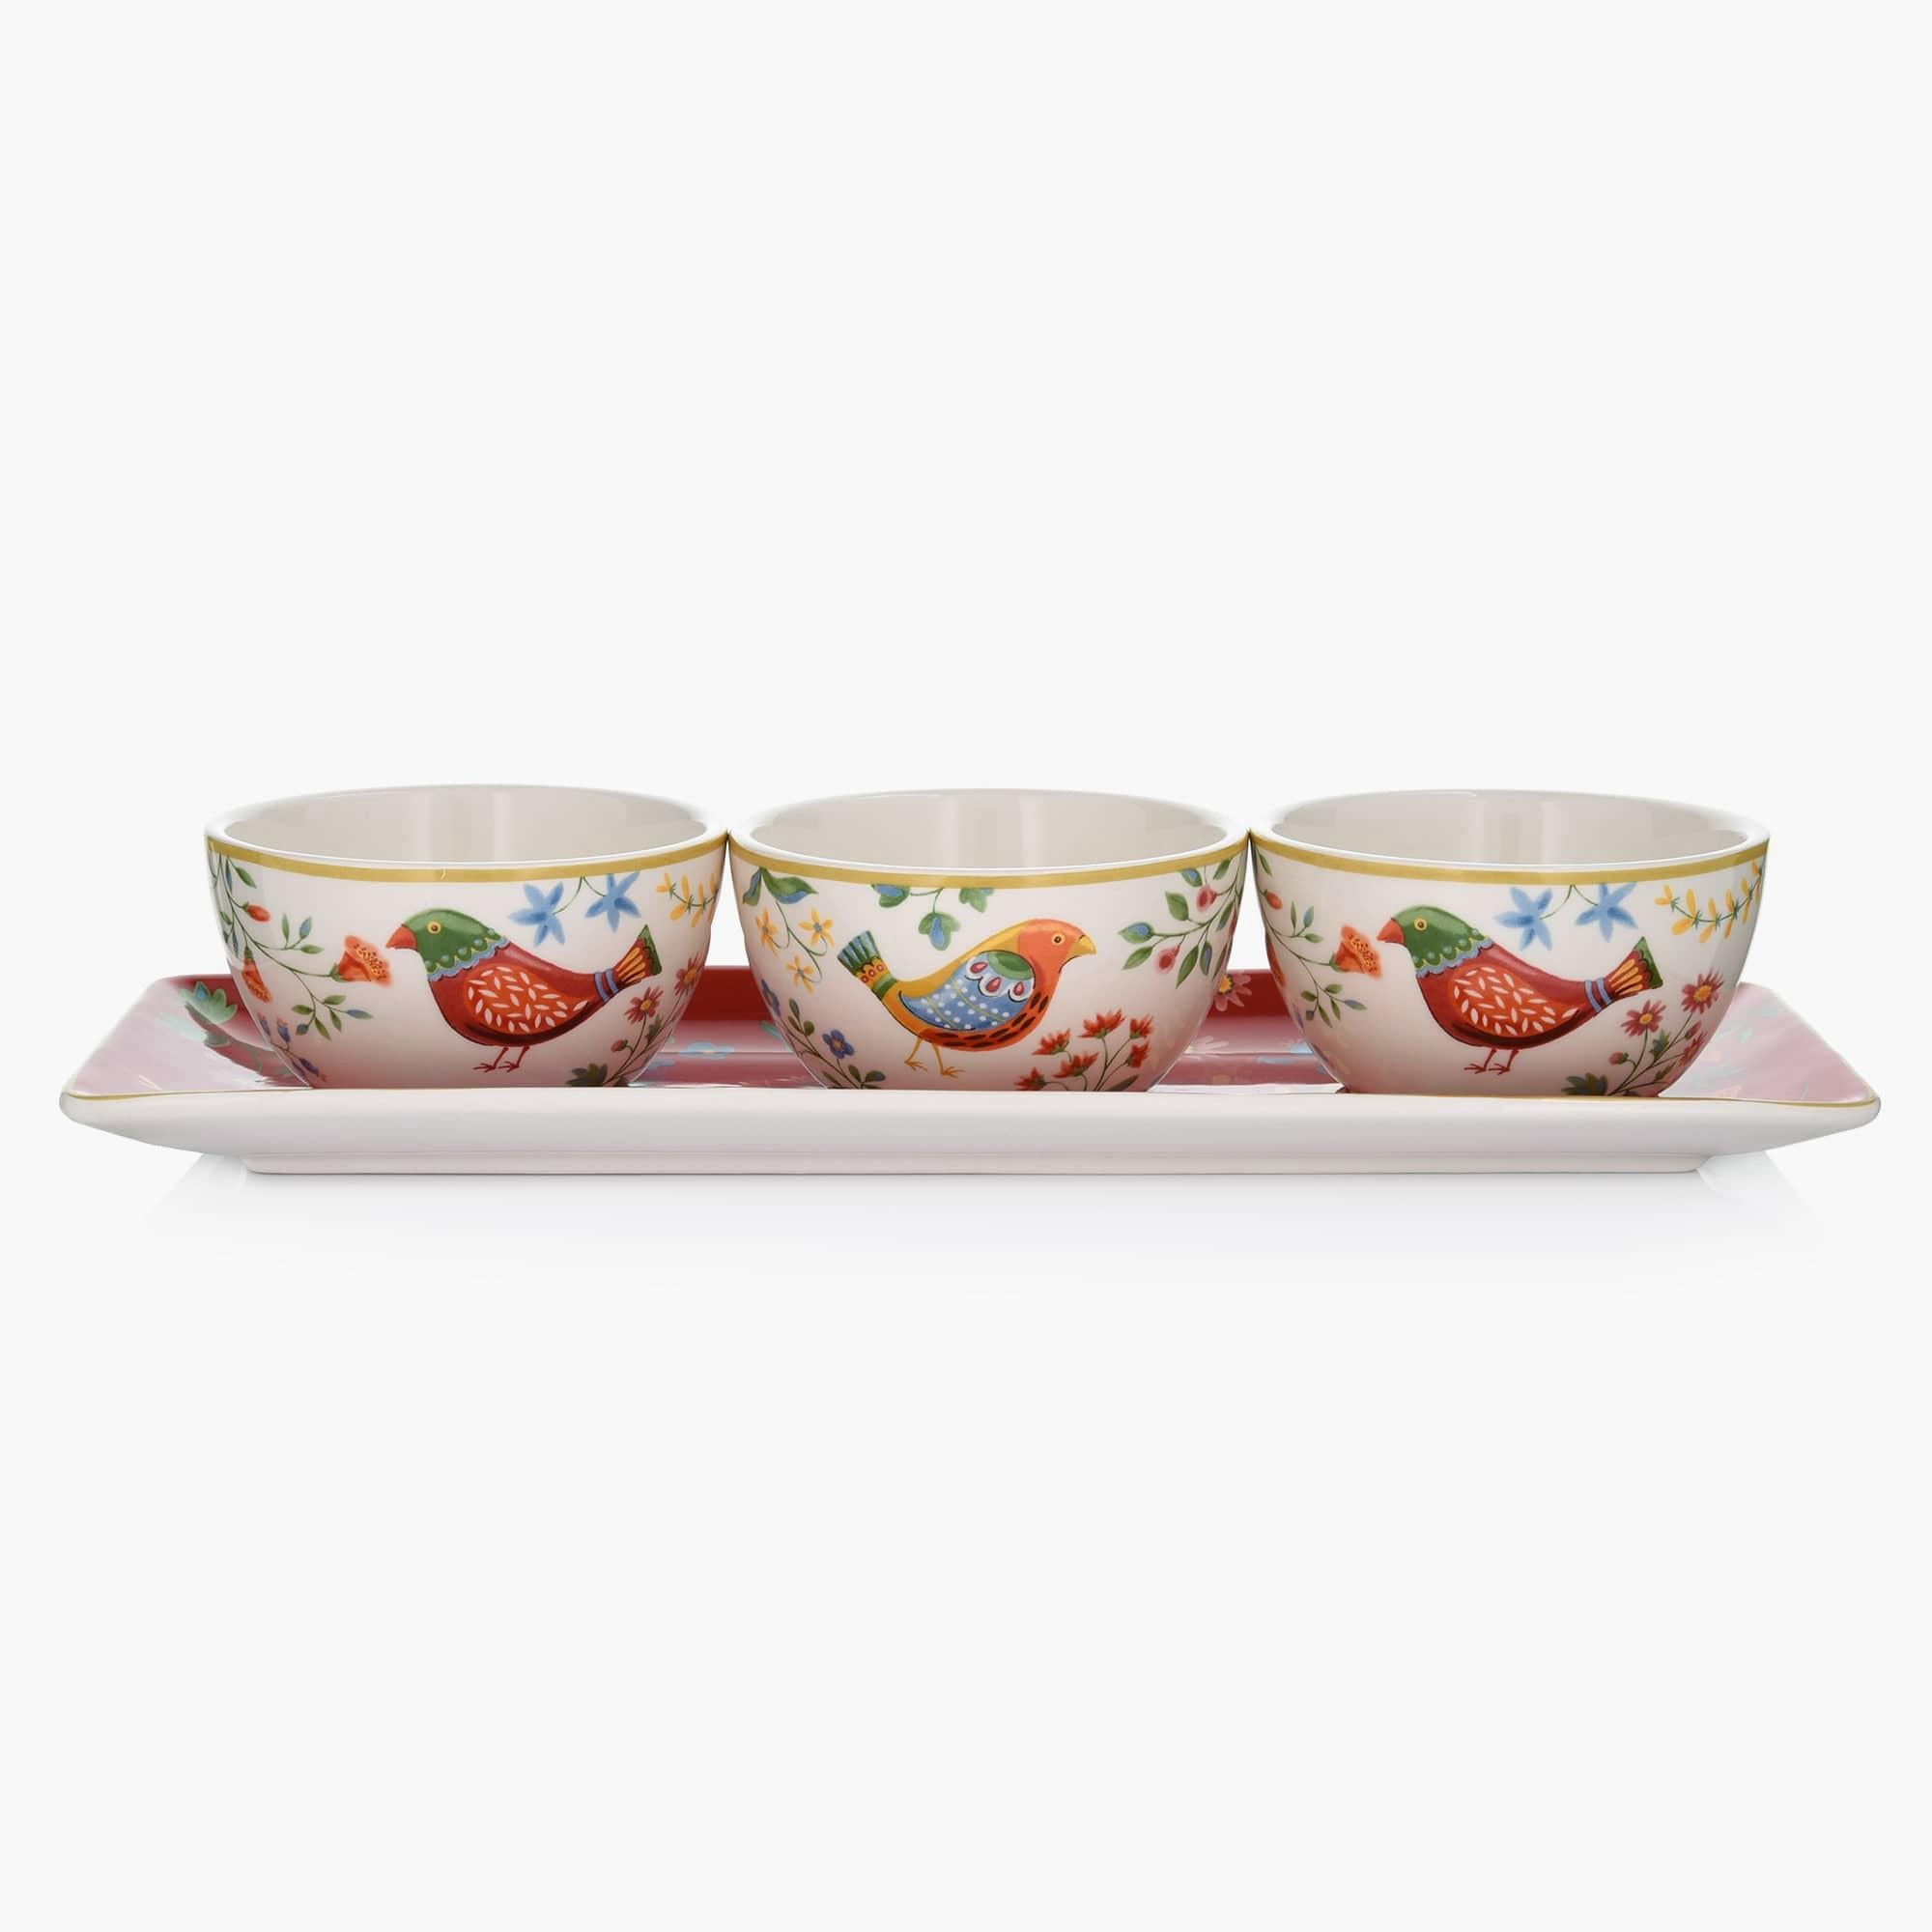 Folk Art Inspired Serving Bowls with Tray